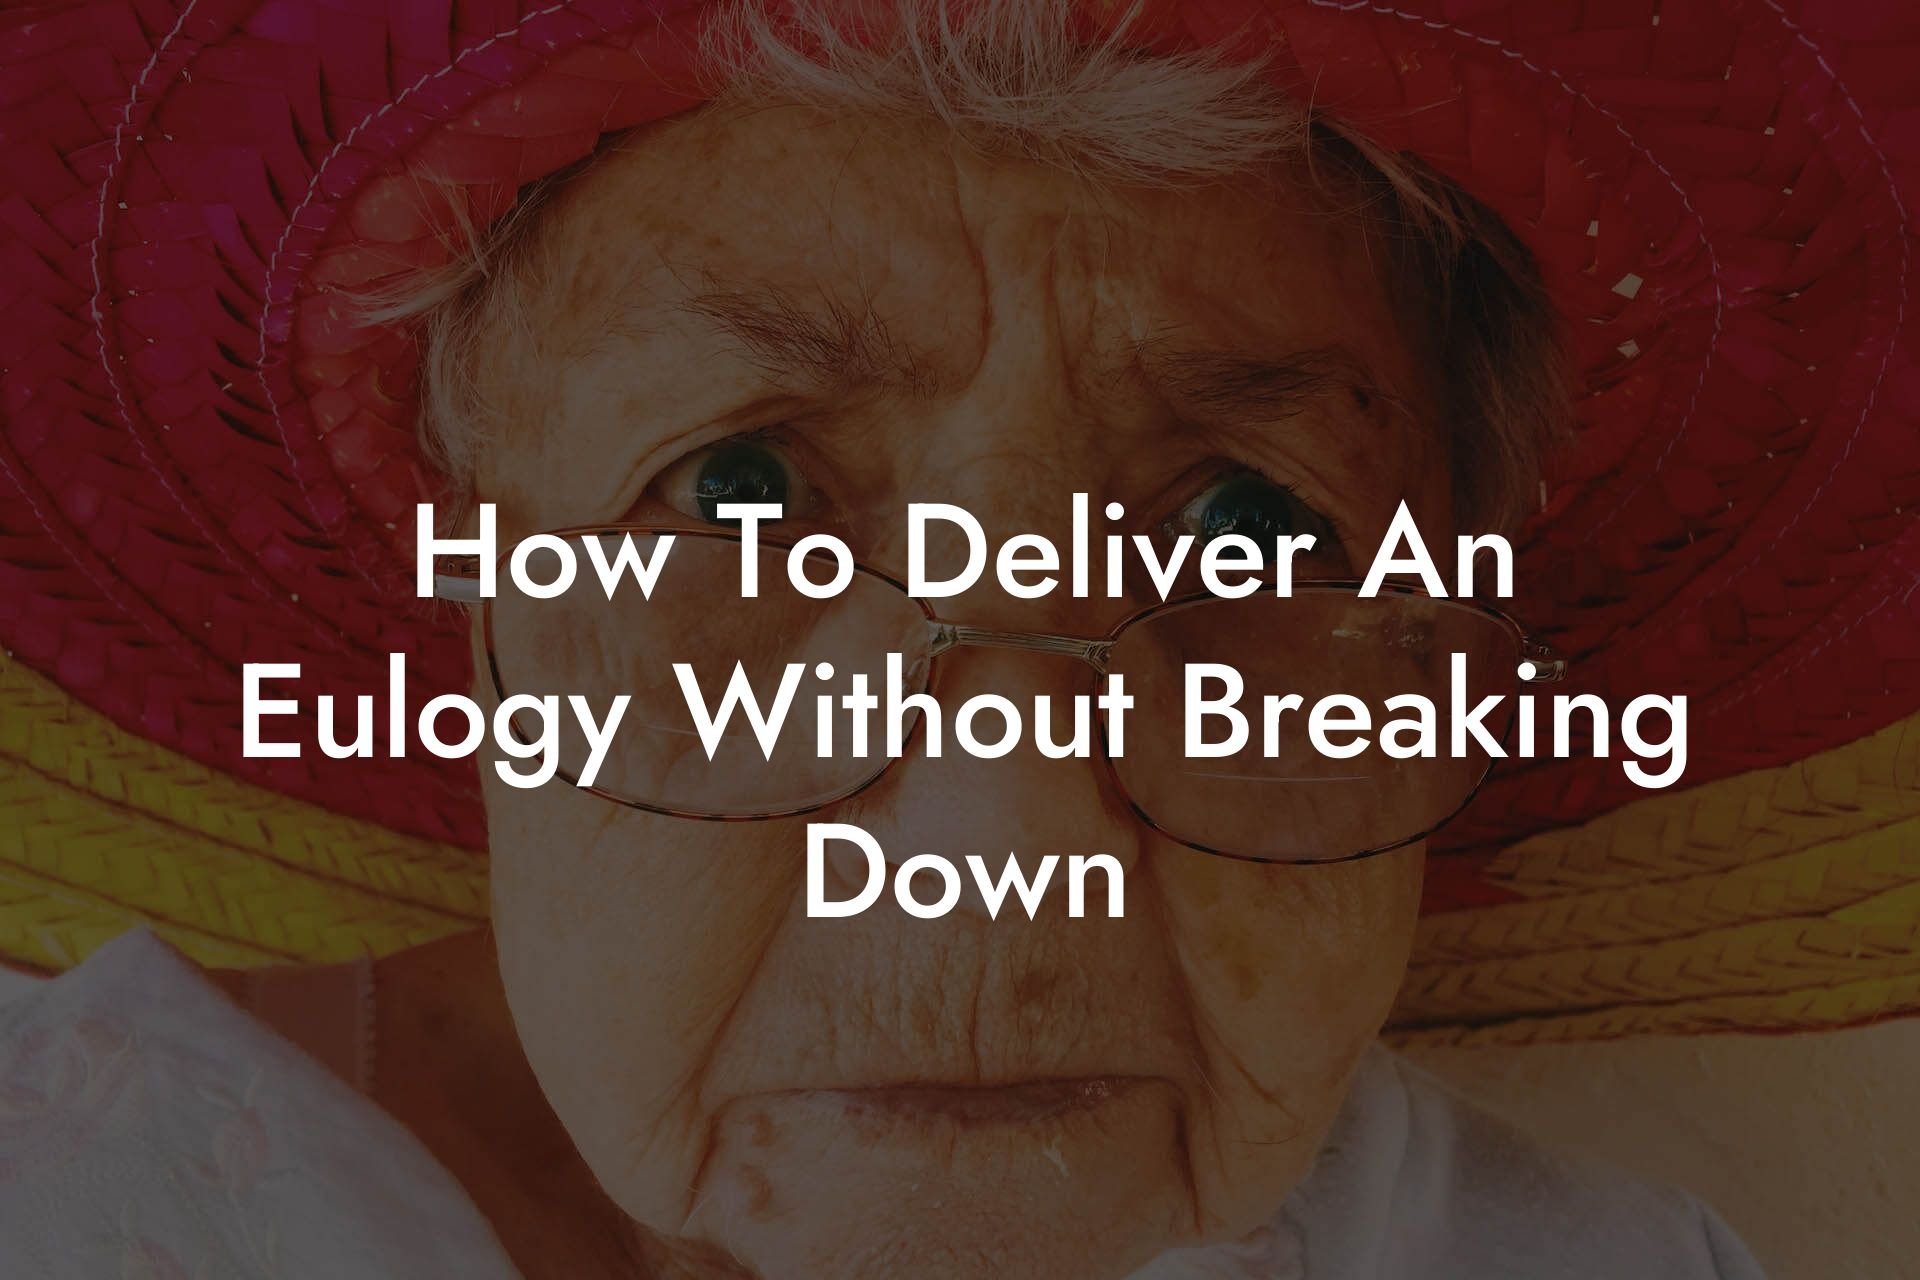 How To Deliver An Eulogy Without Breaking Down